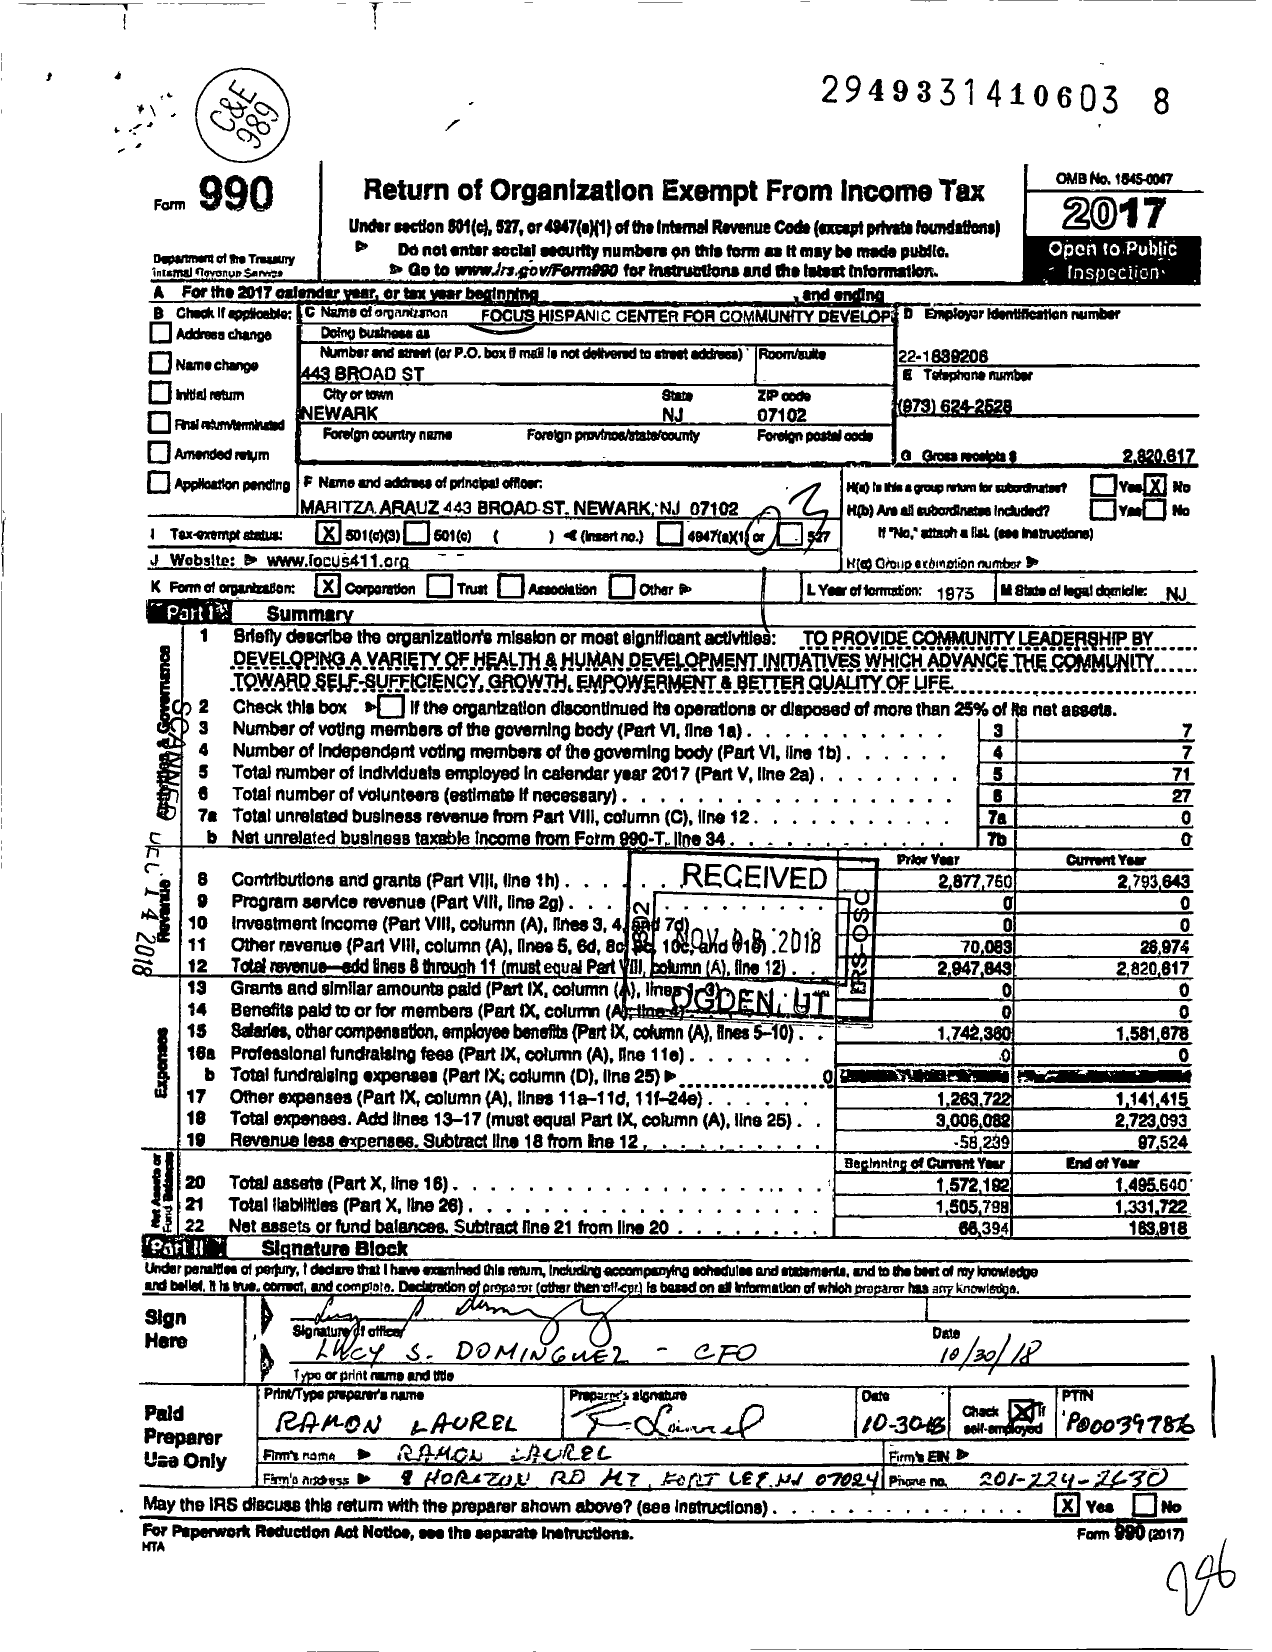 Image of first page of 2017 Form 990 for Focus Hispanic Center for Community Development